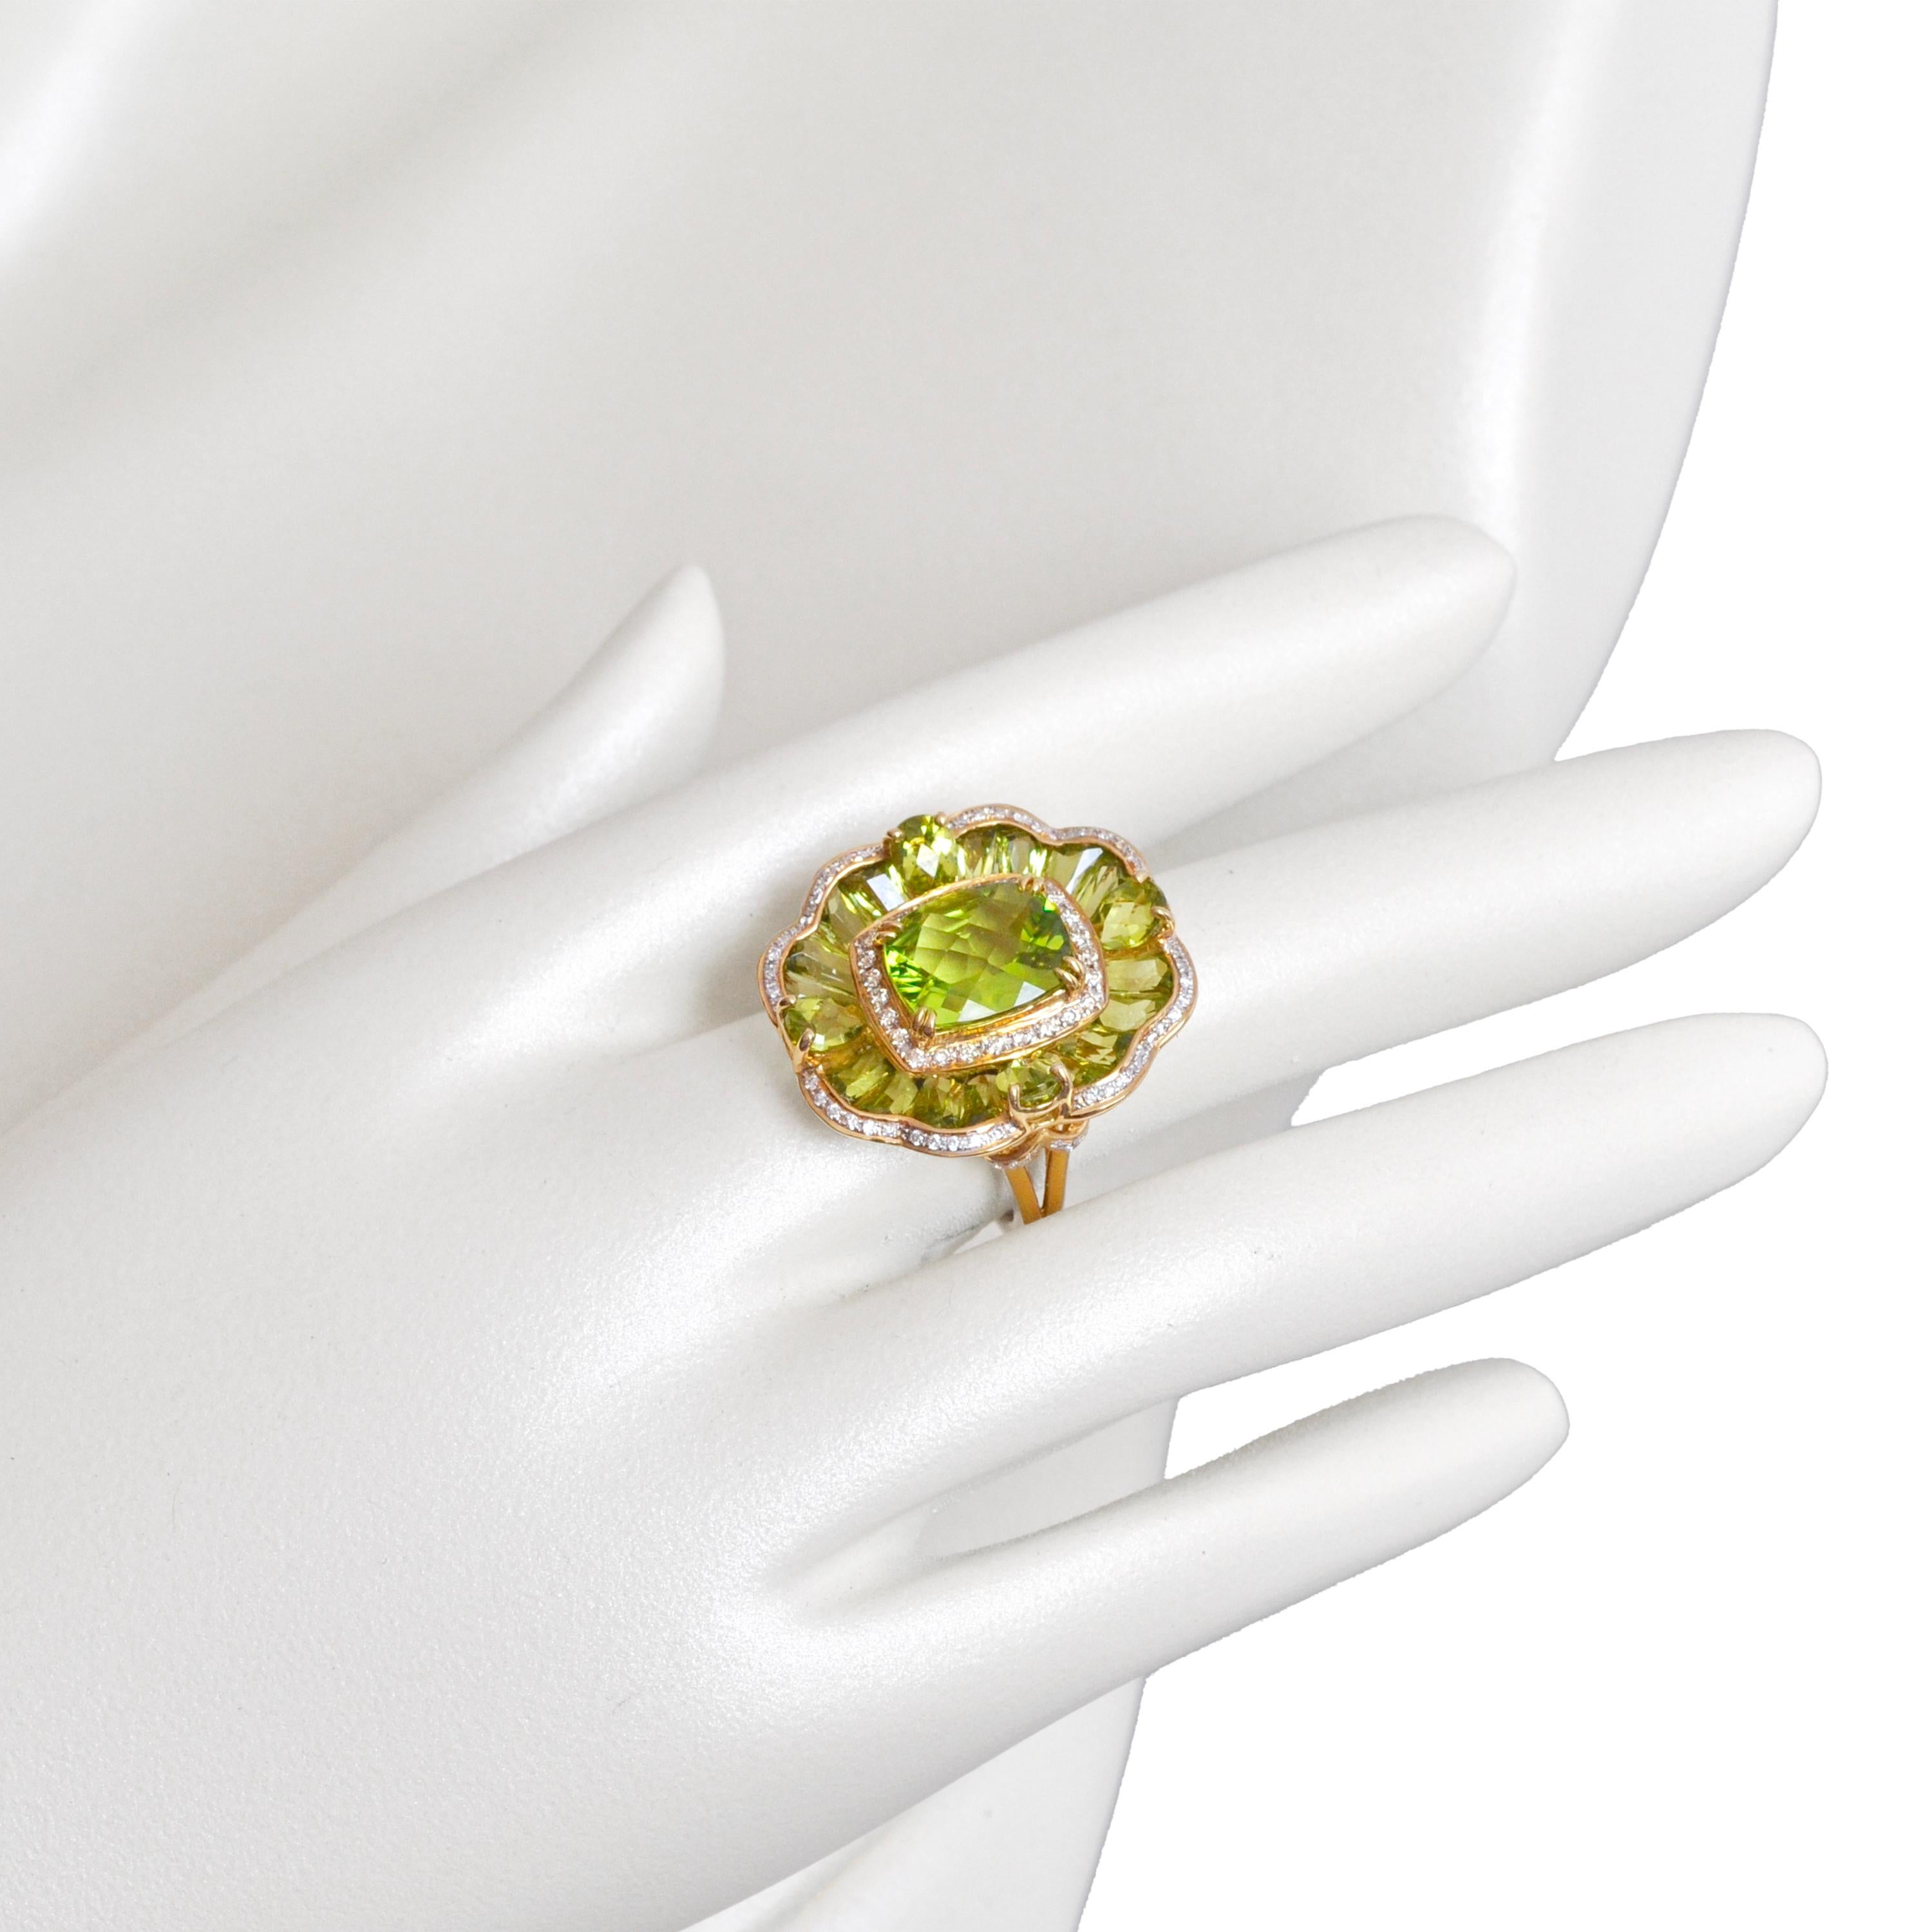 14 karat yellow gold peridot special cut flower contemporary cocktail ring

A stunning showcase of vibrant elegance and timeless design, this peridot tapered baguette ring is crafted in 14 karat rose gold. Crafted in lustrous 14 karat gold, this